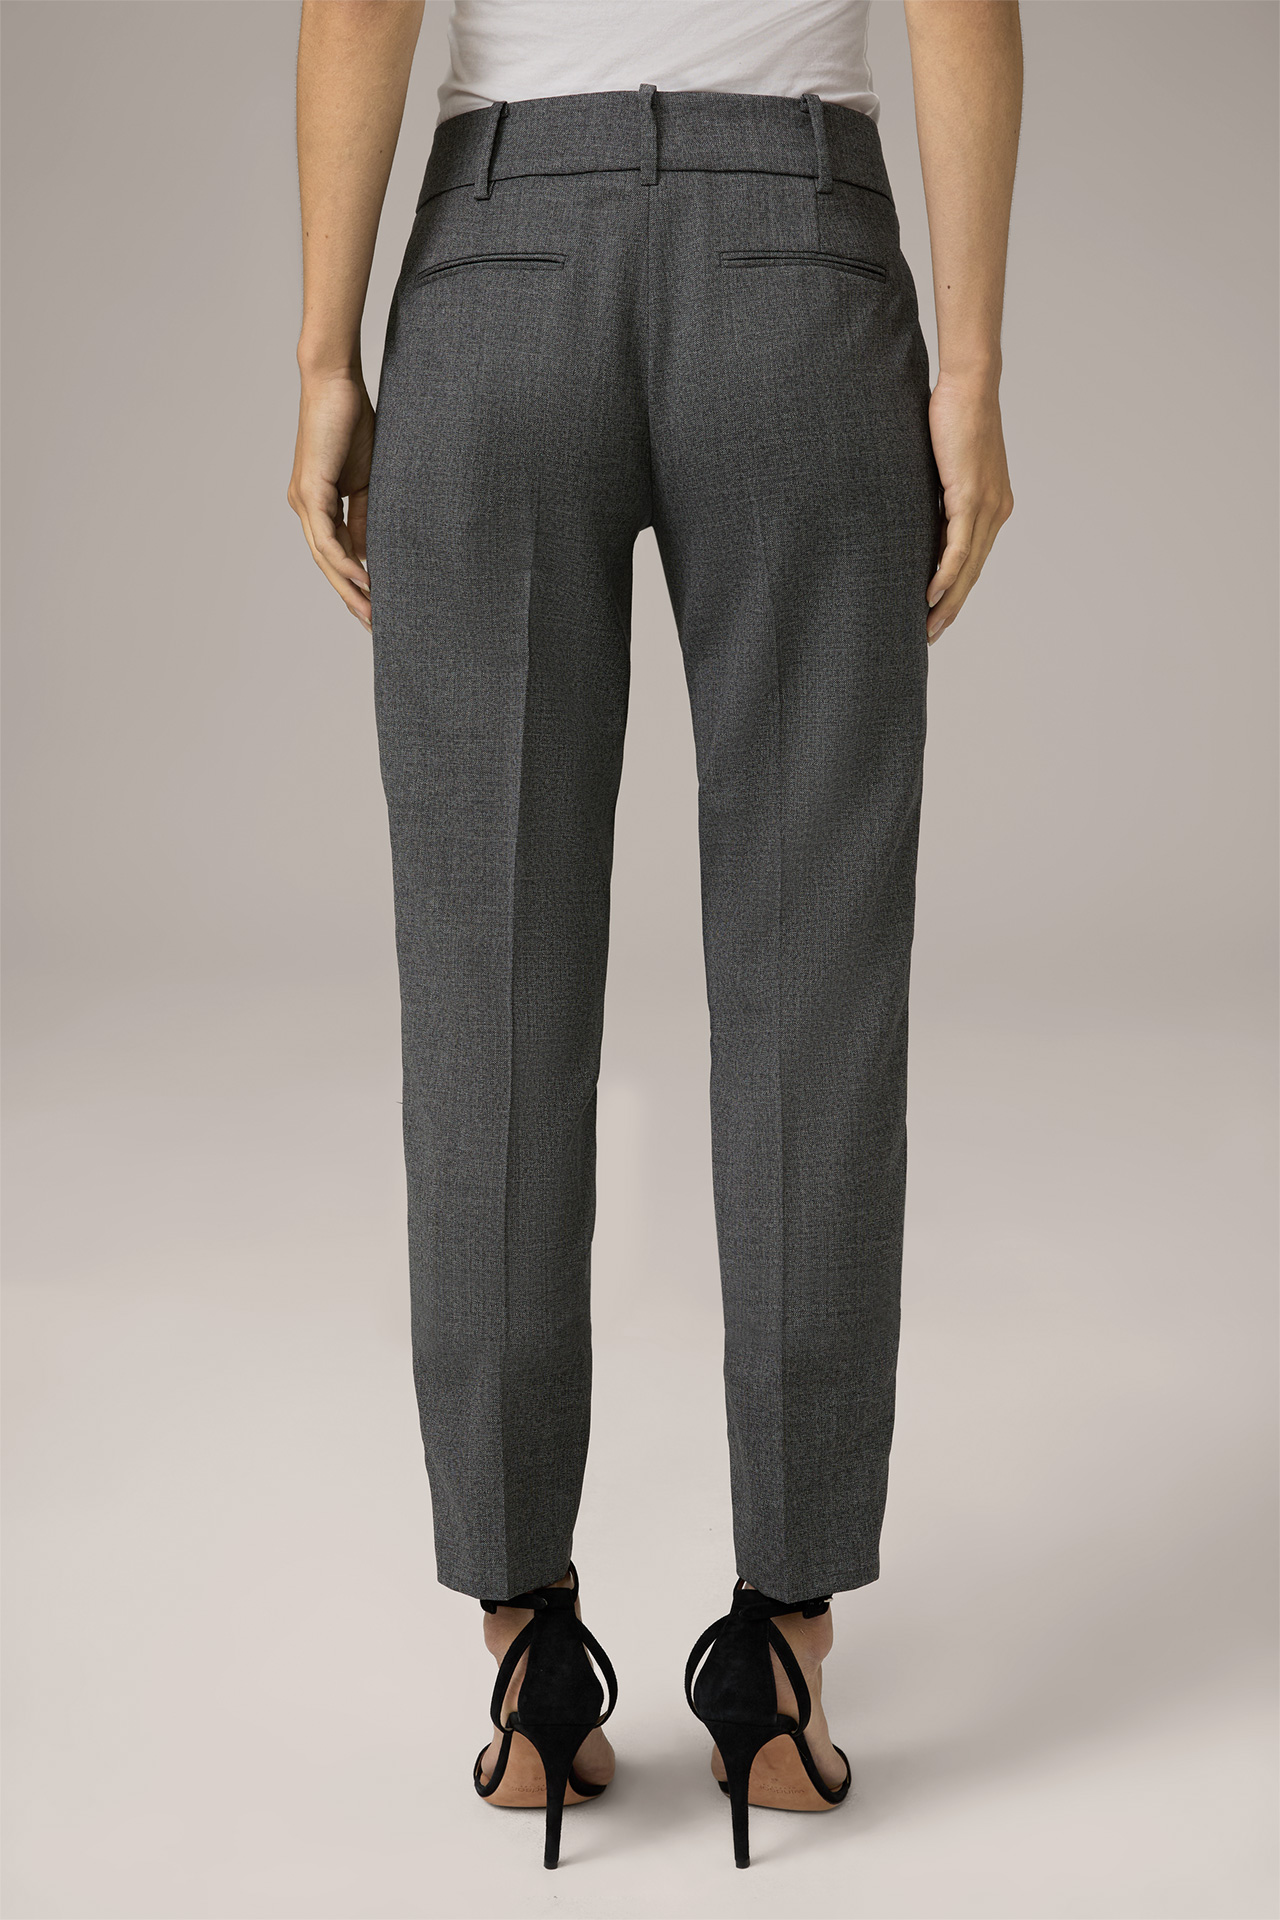 Virgin wool Mouliné Suit Trousers in an Anthracite Pattern